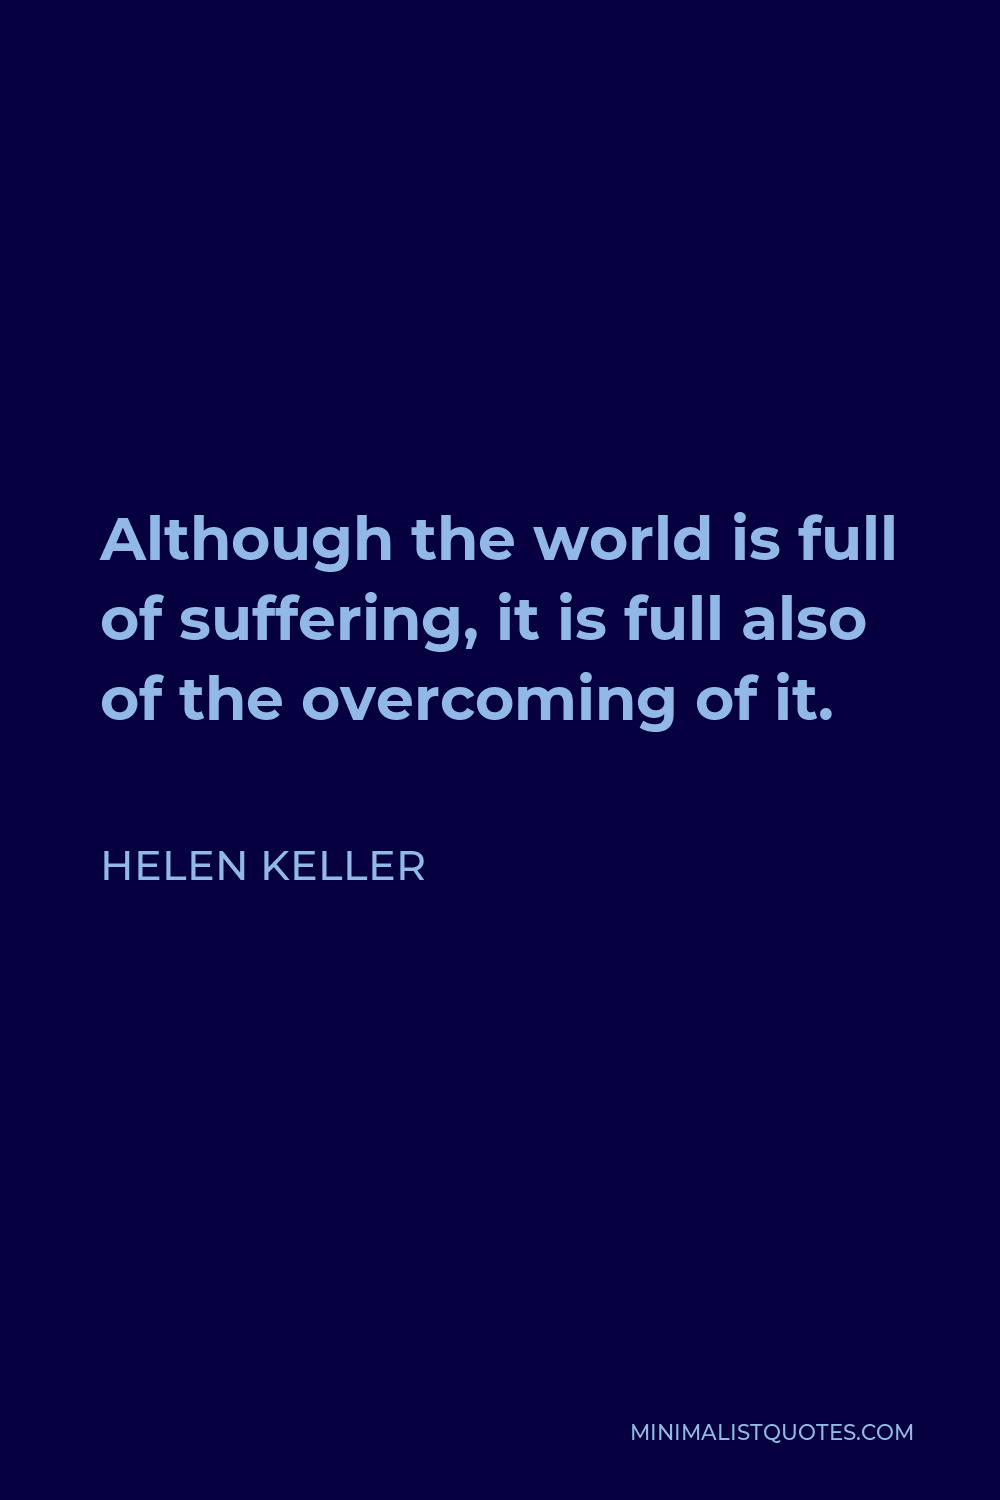 Helen Keller Quote - Although the world is full of suffering, it is full also of the overcoming of it.